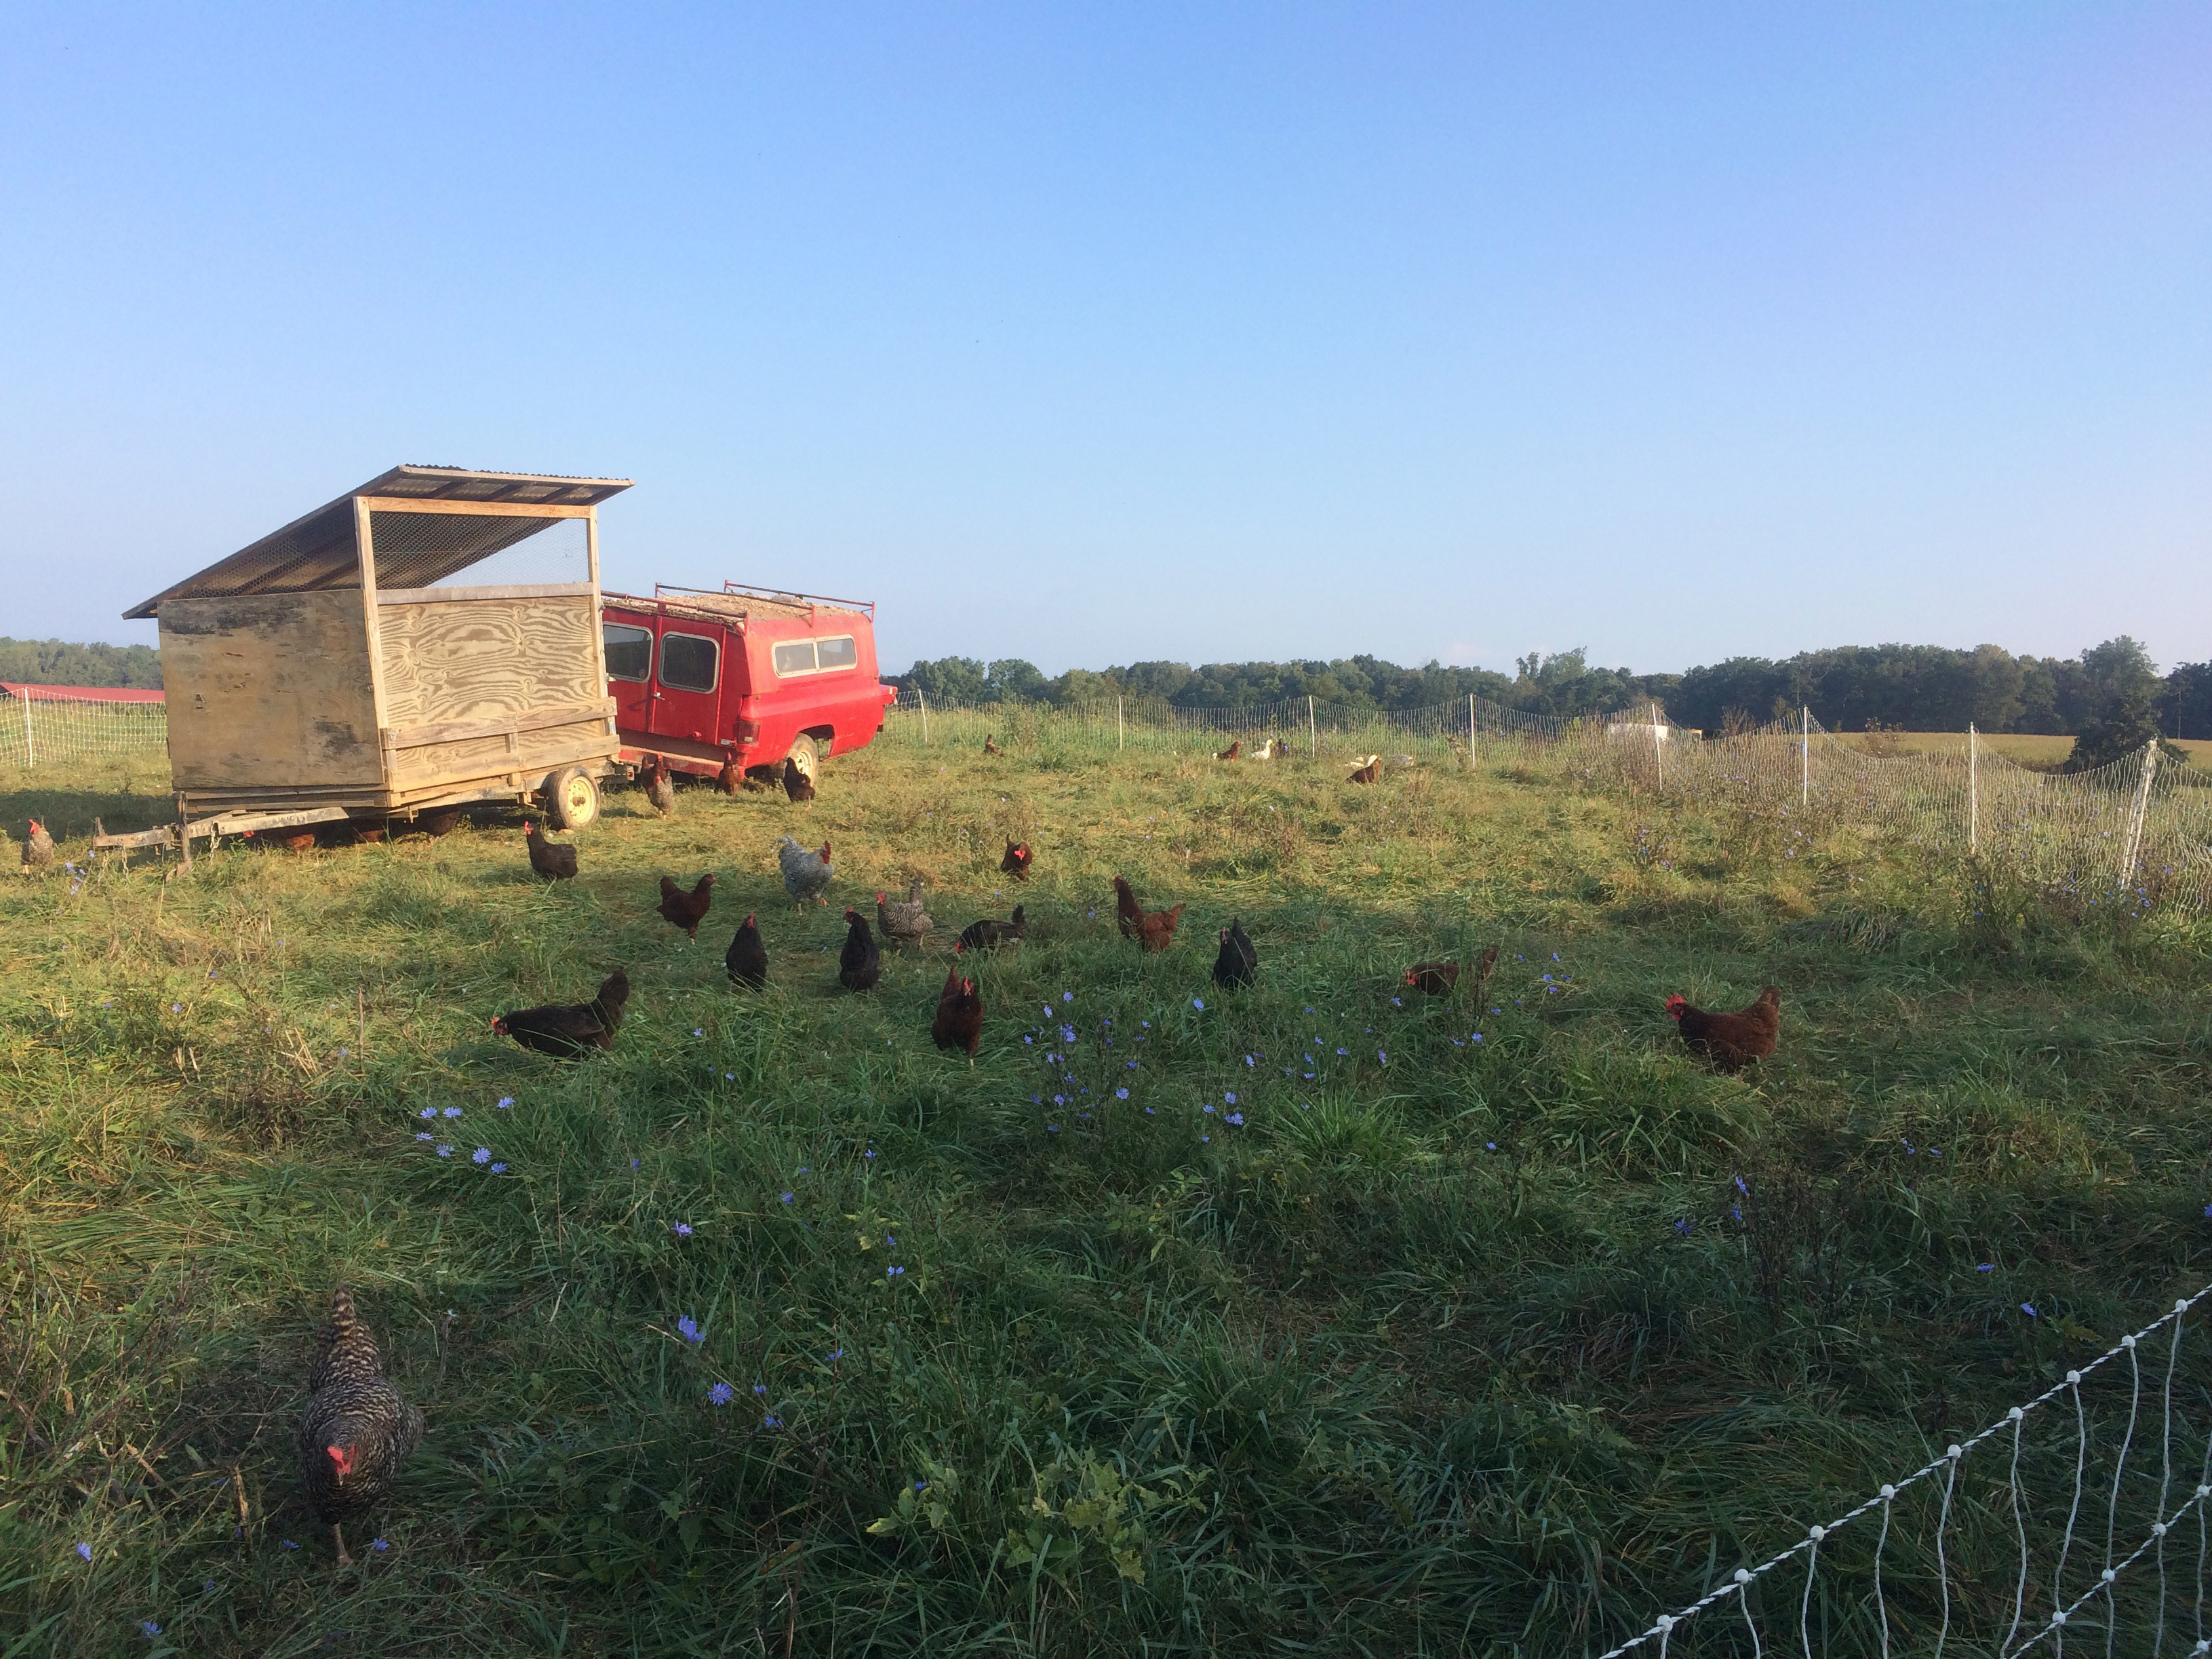 Chickens roam in their floorless pen on Chris Newman's farm. Newman quit his desk job to take up farming. He hopes to encourage more people of color to become farmers and push for sustainable farming practices, so healthy food becomes accessible to those who can't afford it.